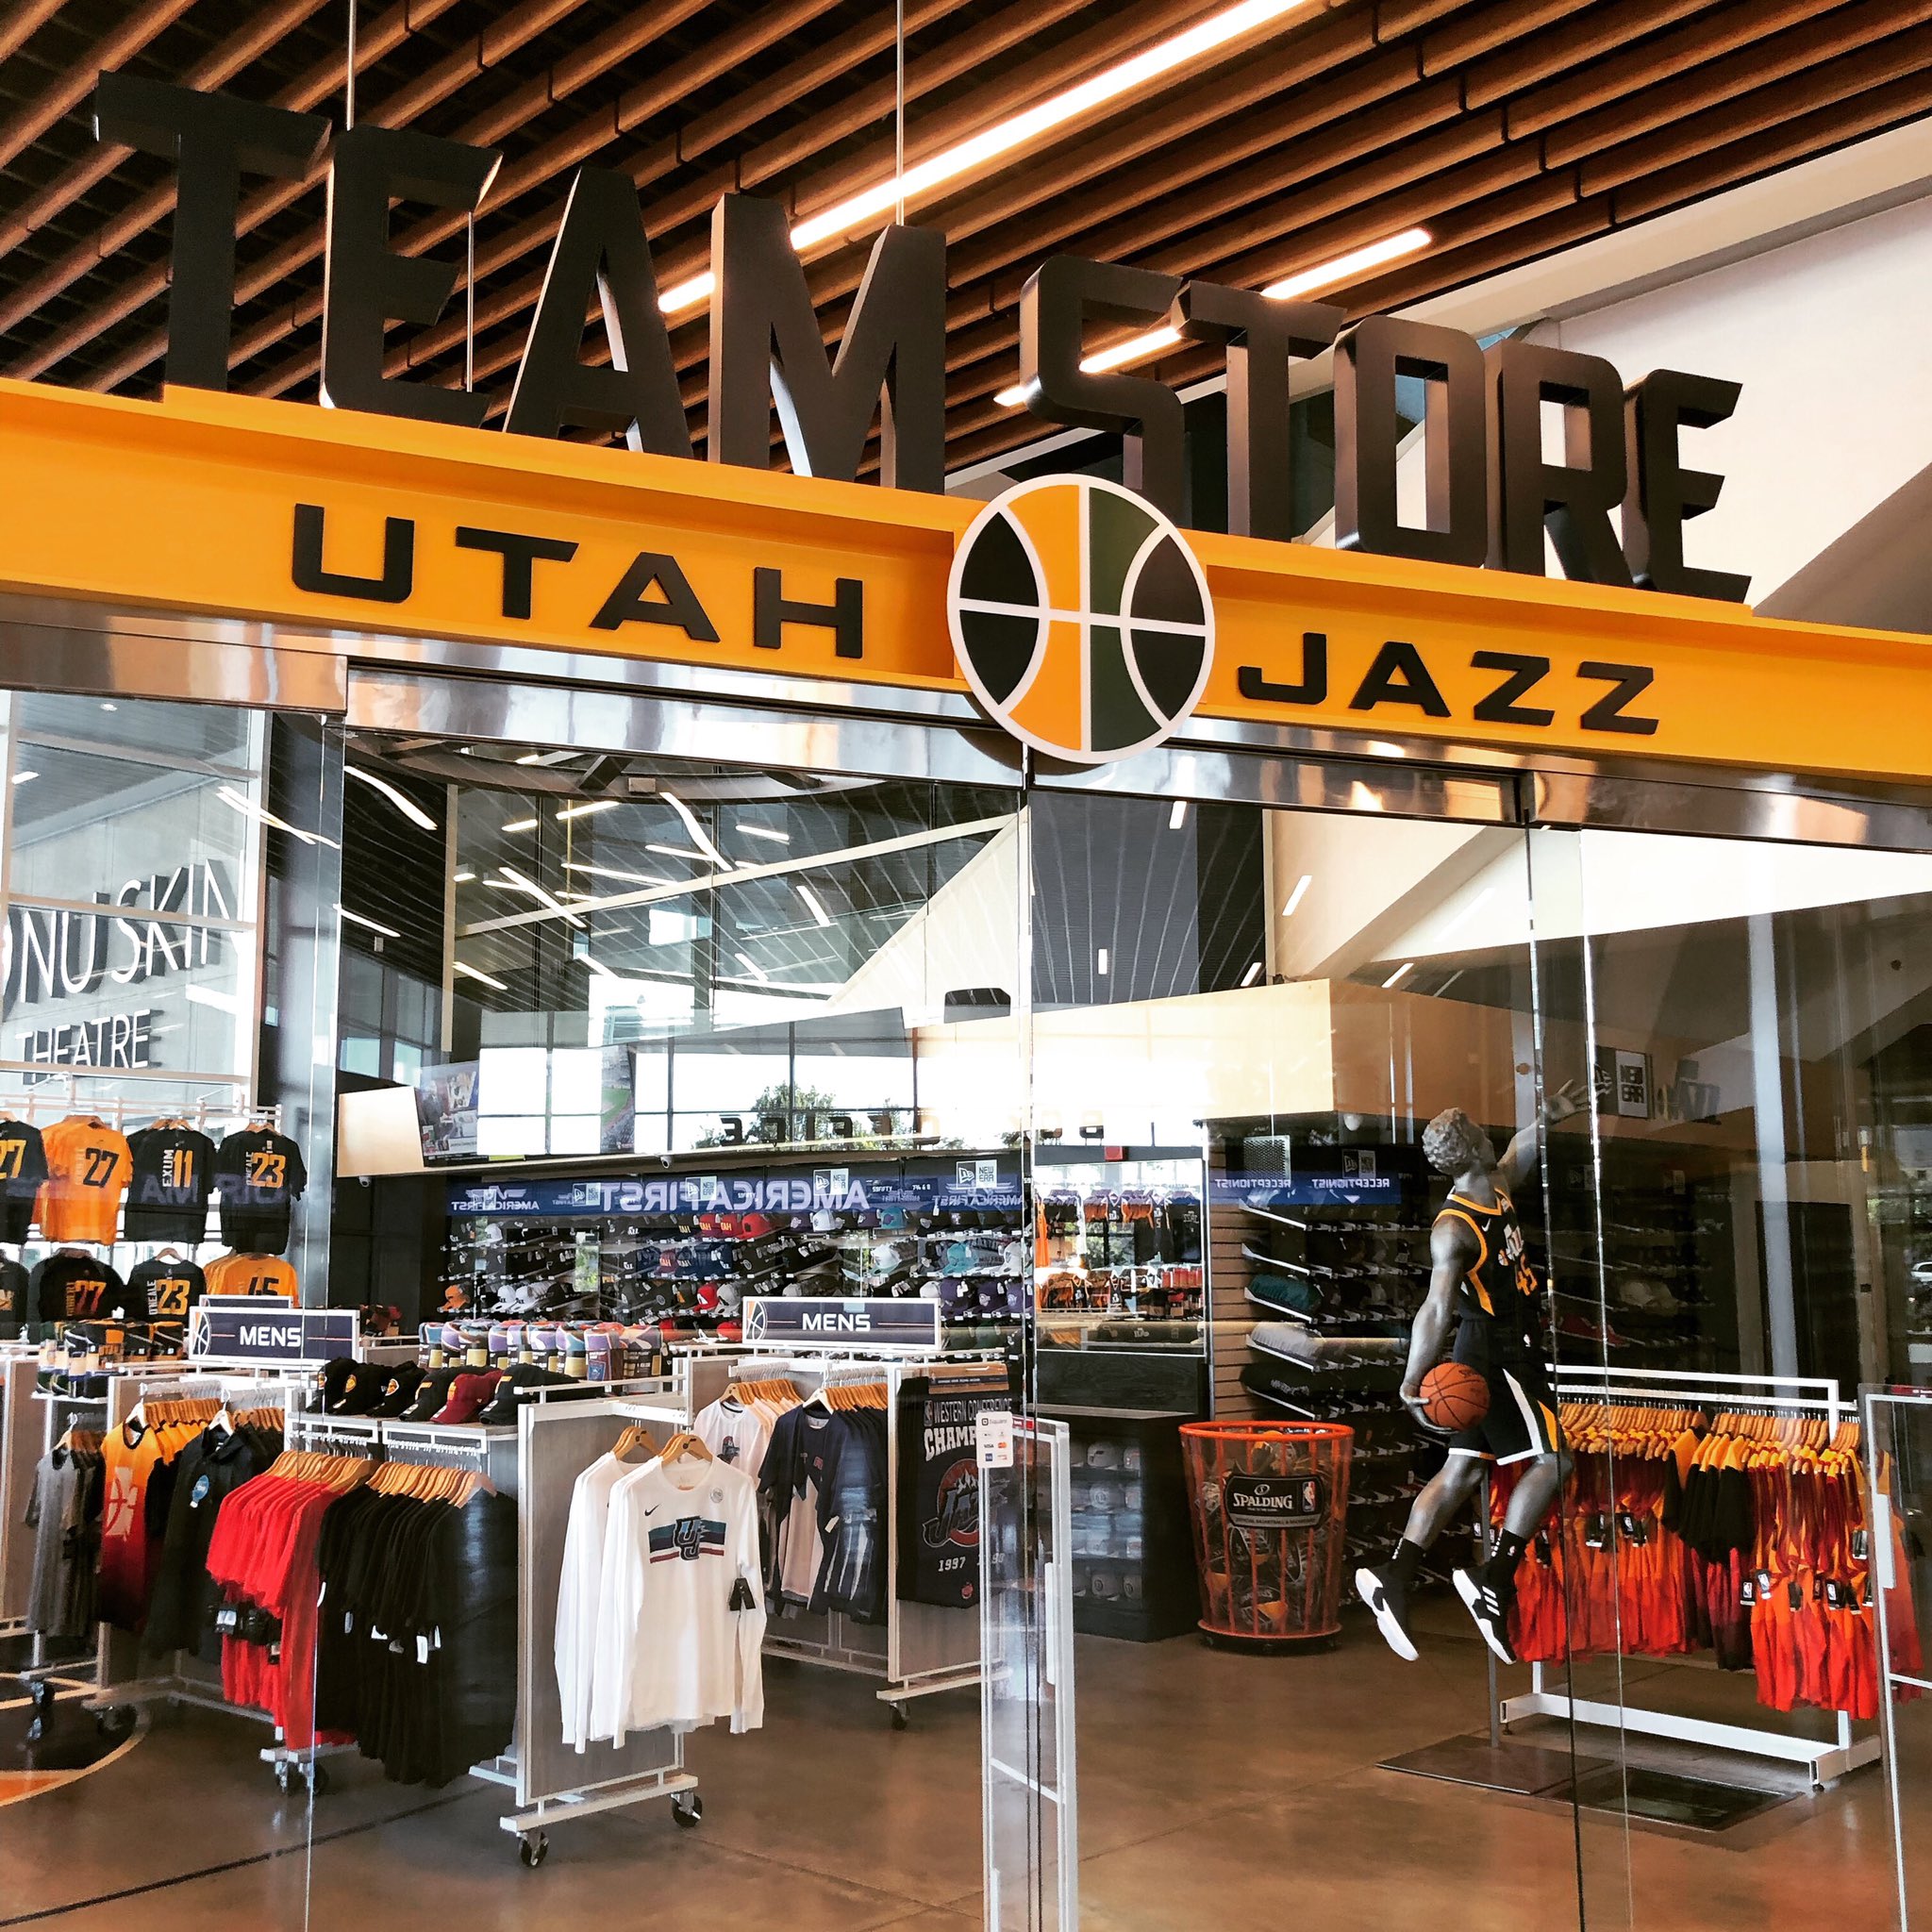 Utah Jazz teams up with famed fashionista Lotas - TownLift, Park City News